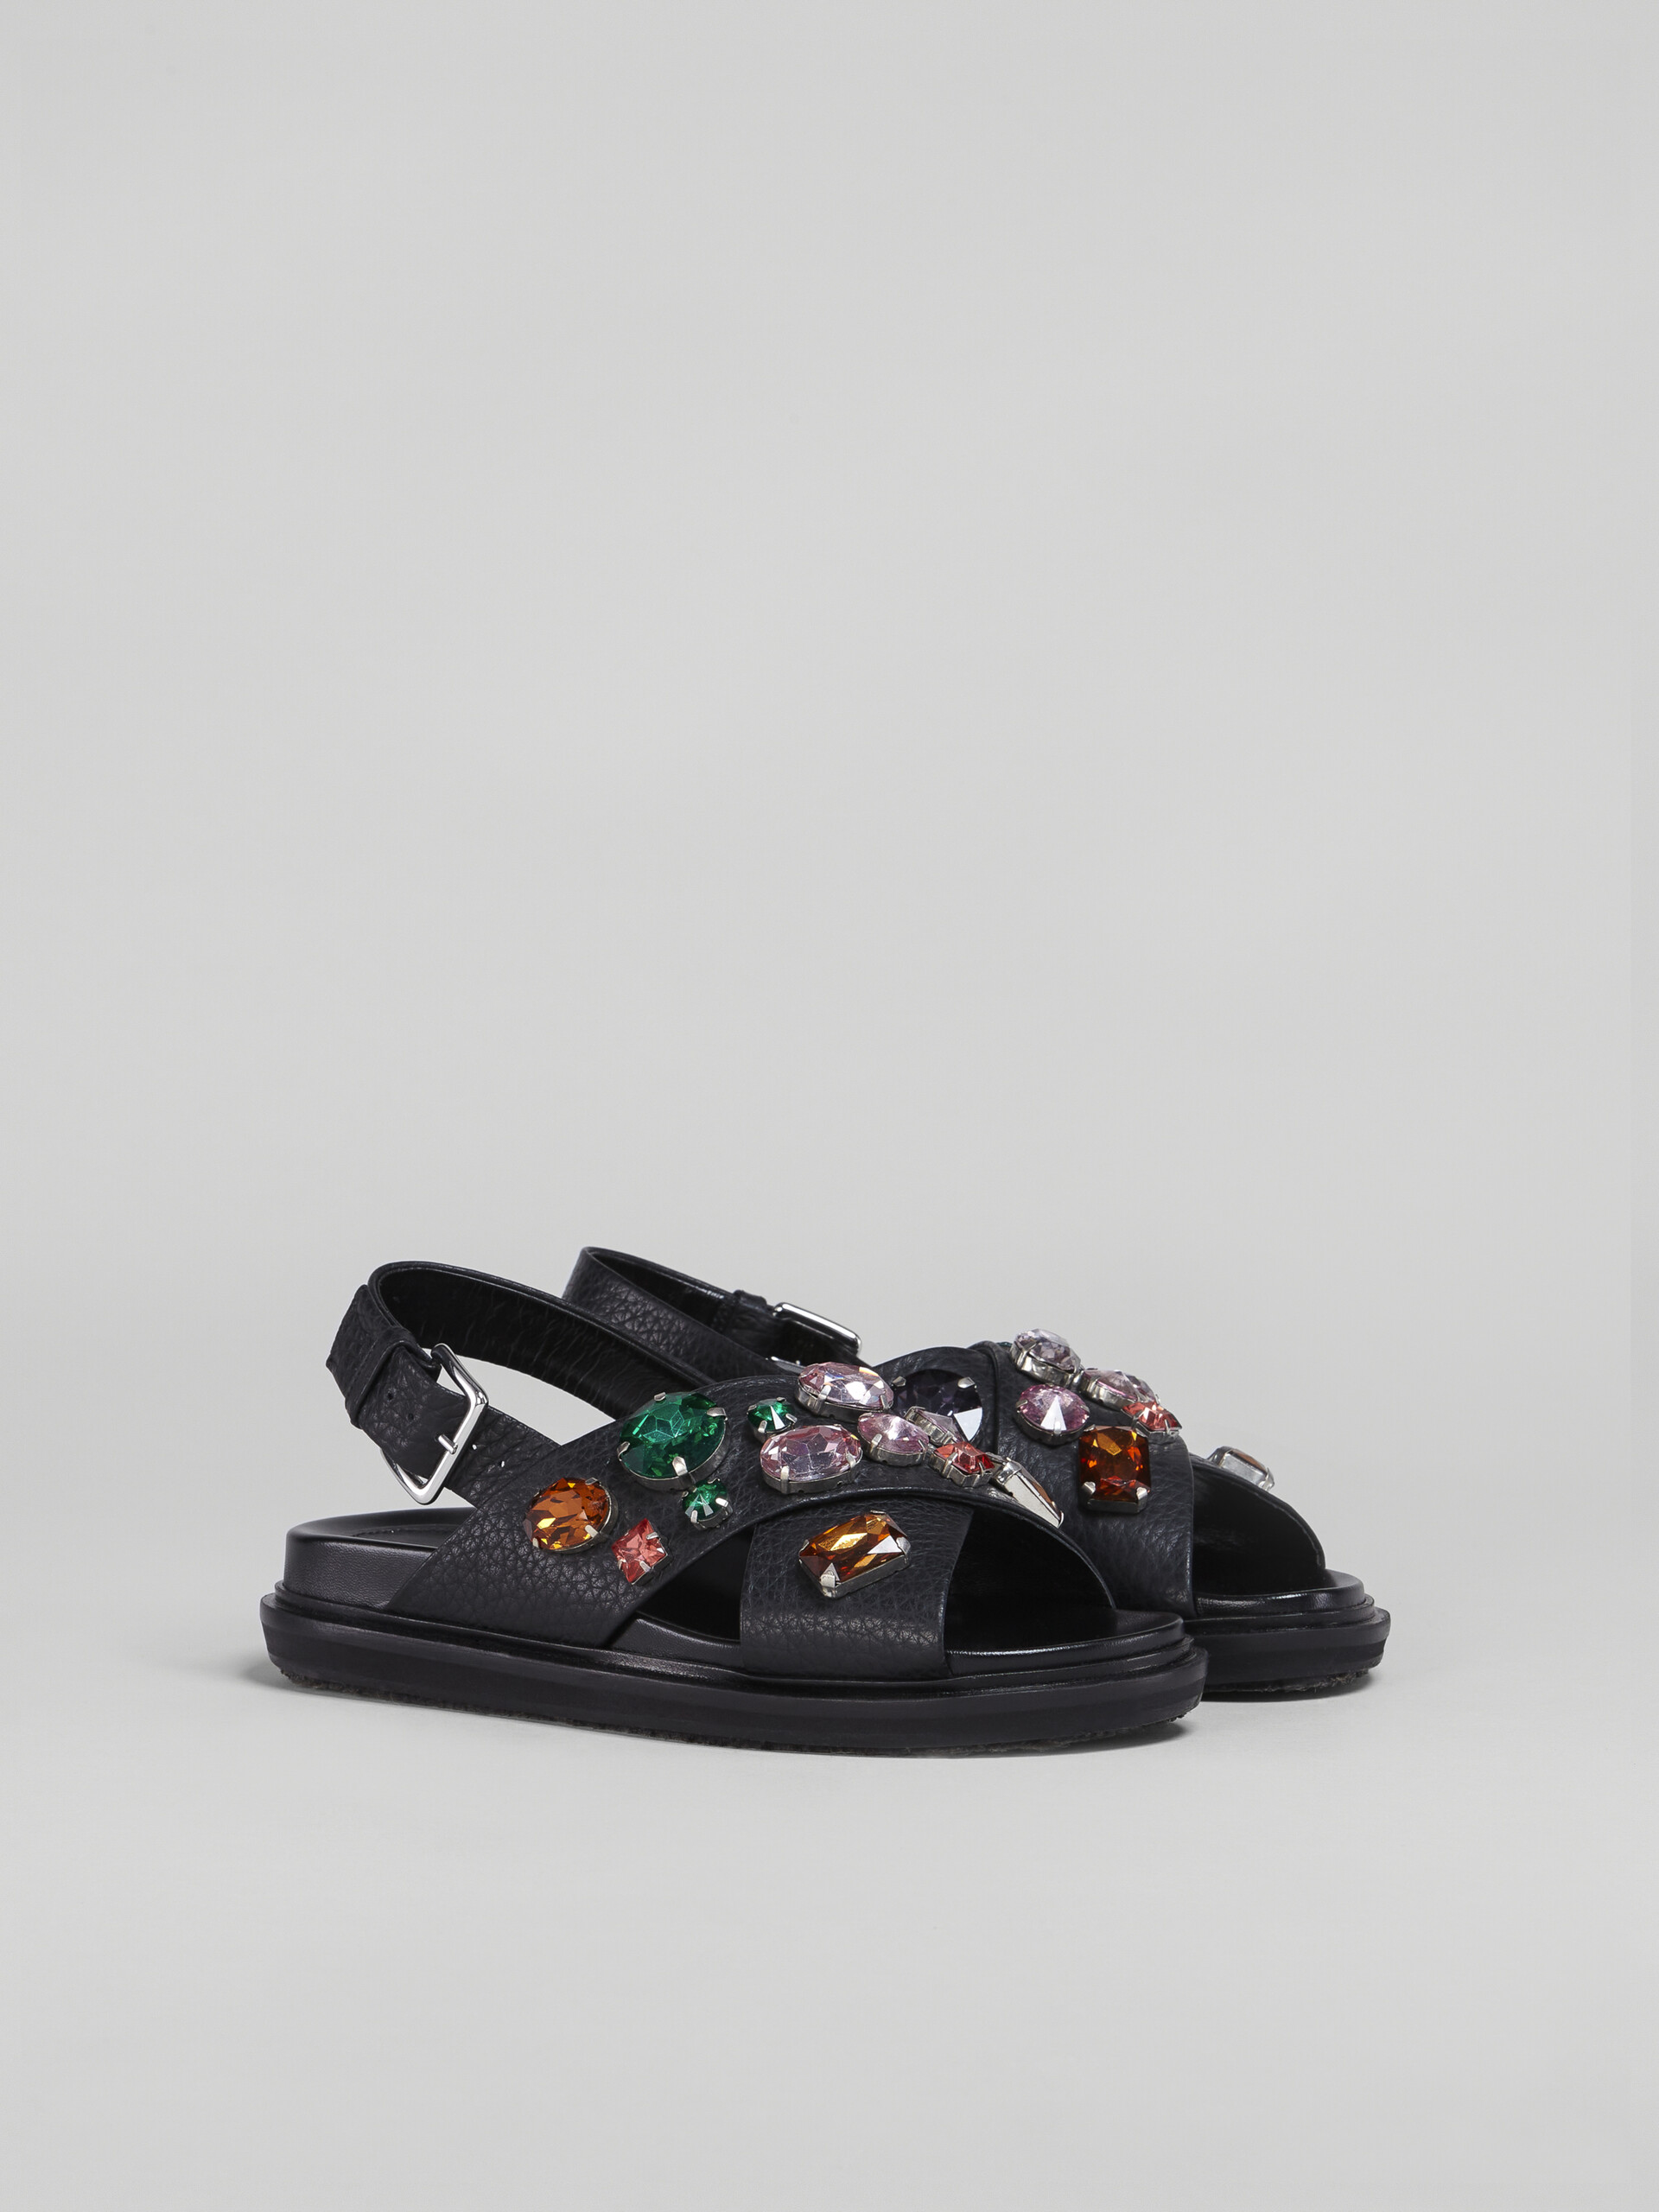 Black leather Fussbett with glass beads - Sandals - Image 2